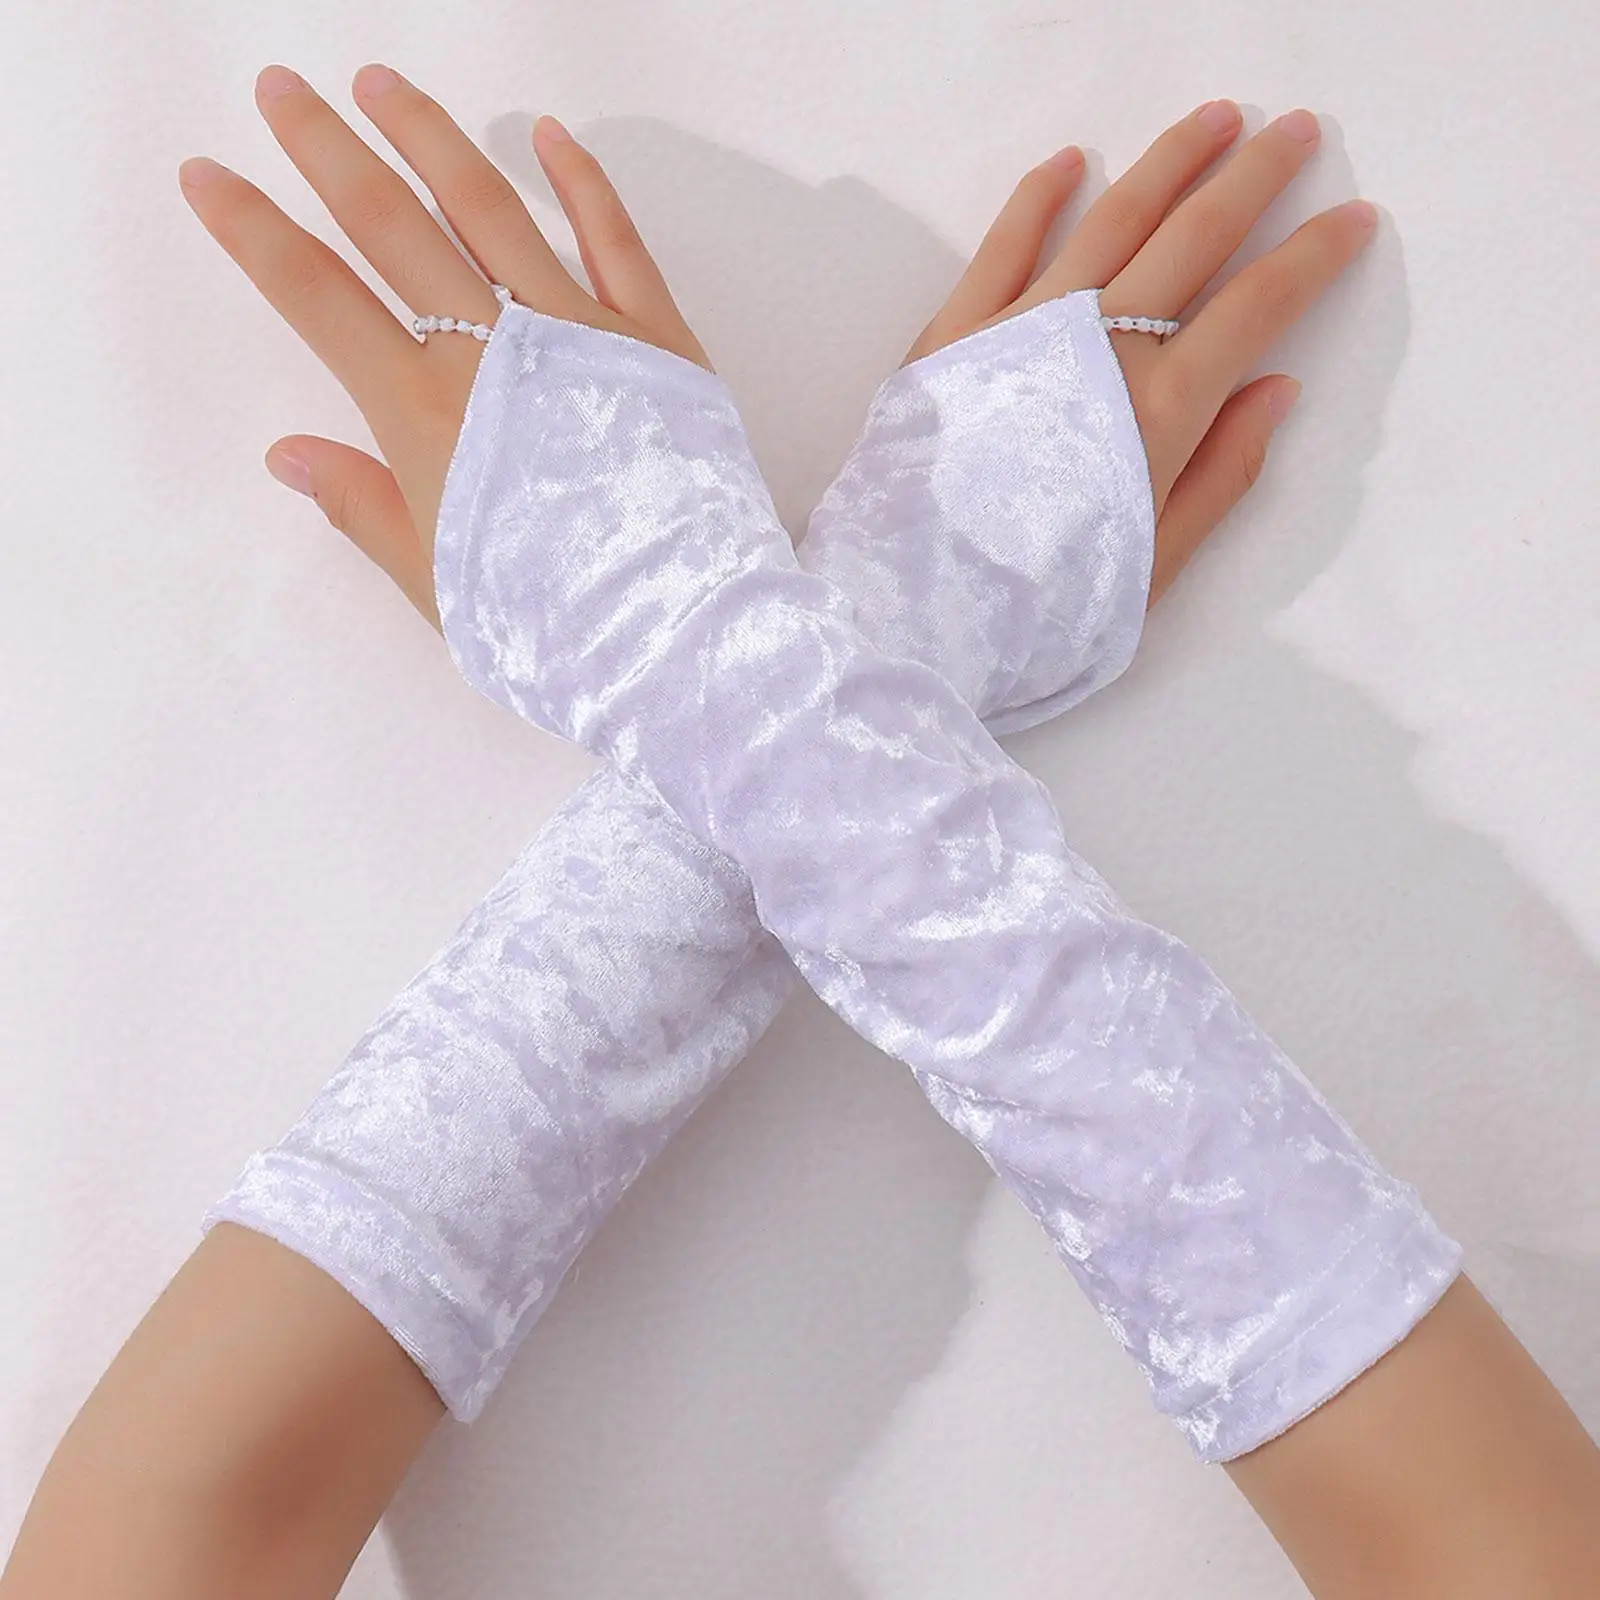 Women Girls Fingerless Gloves Arm Warmers Sun Protection Driving Gloves Ladies Mittens Fashion Arm Sleeves for Wedding Party